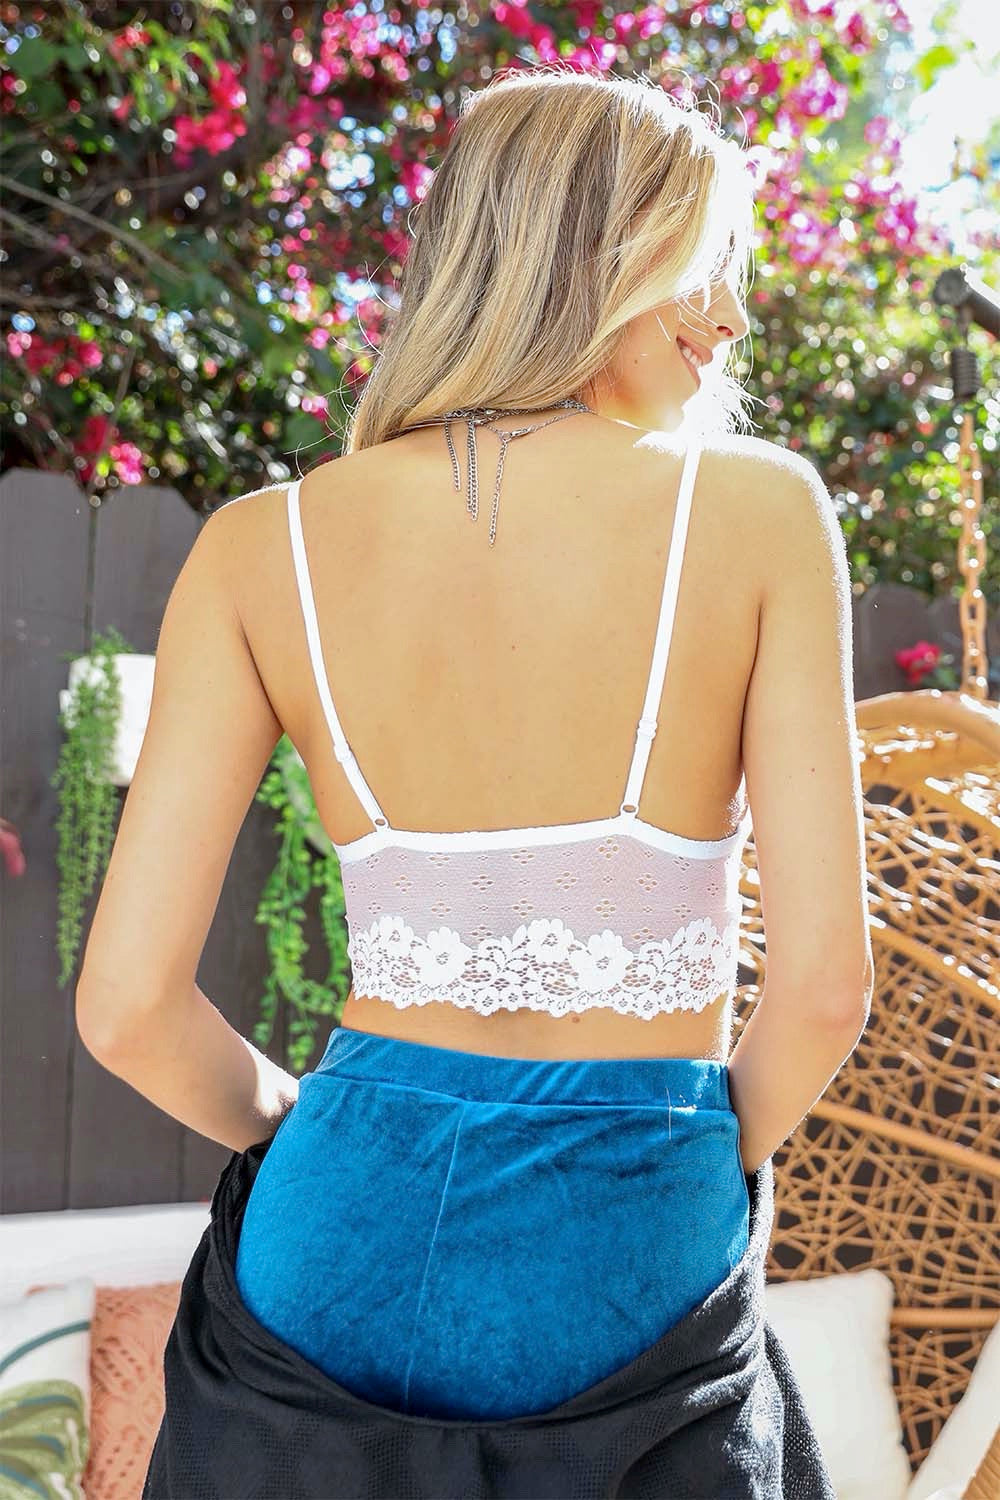 Women's Lace Strappy Bralette Sexy Floral Lace Bra Perspective